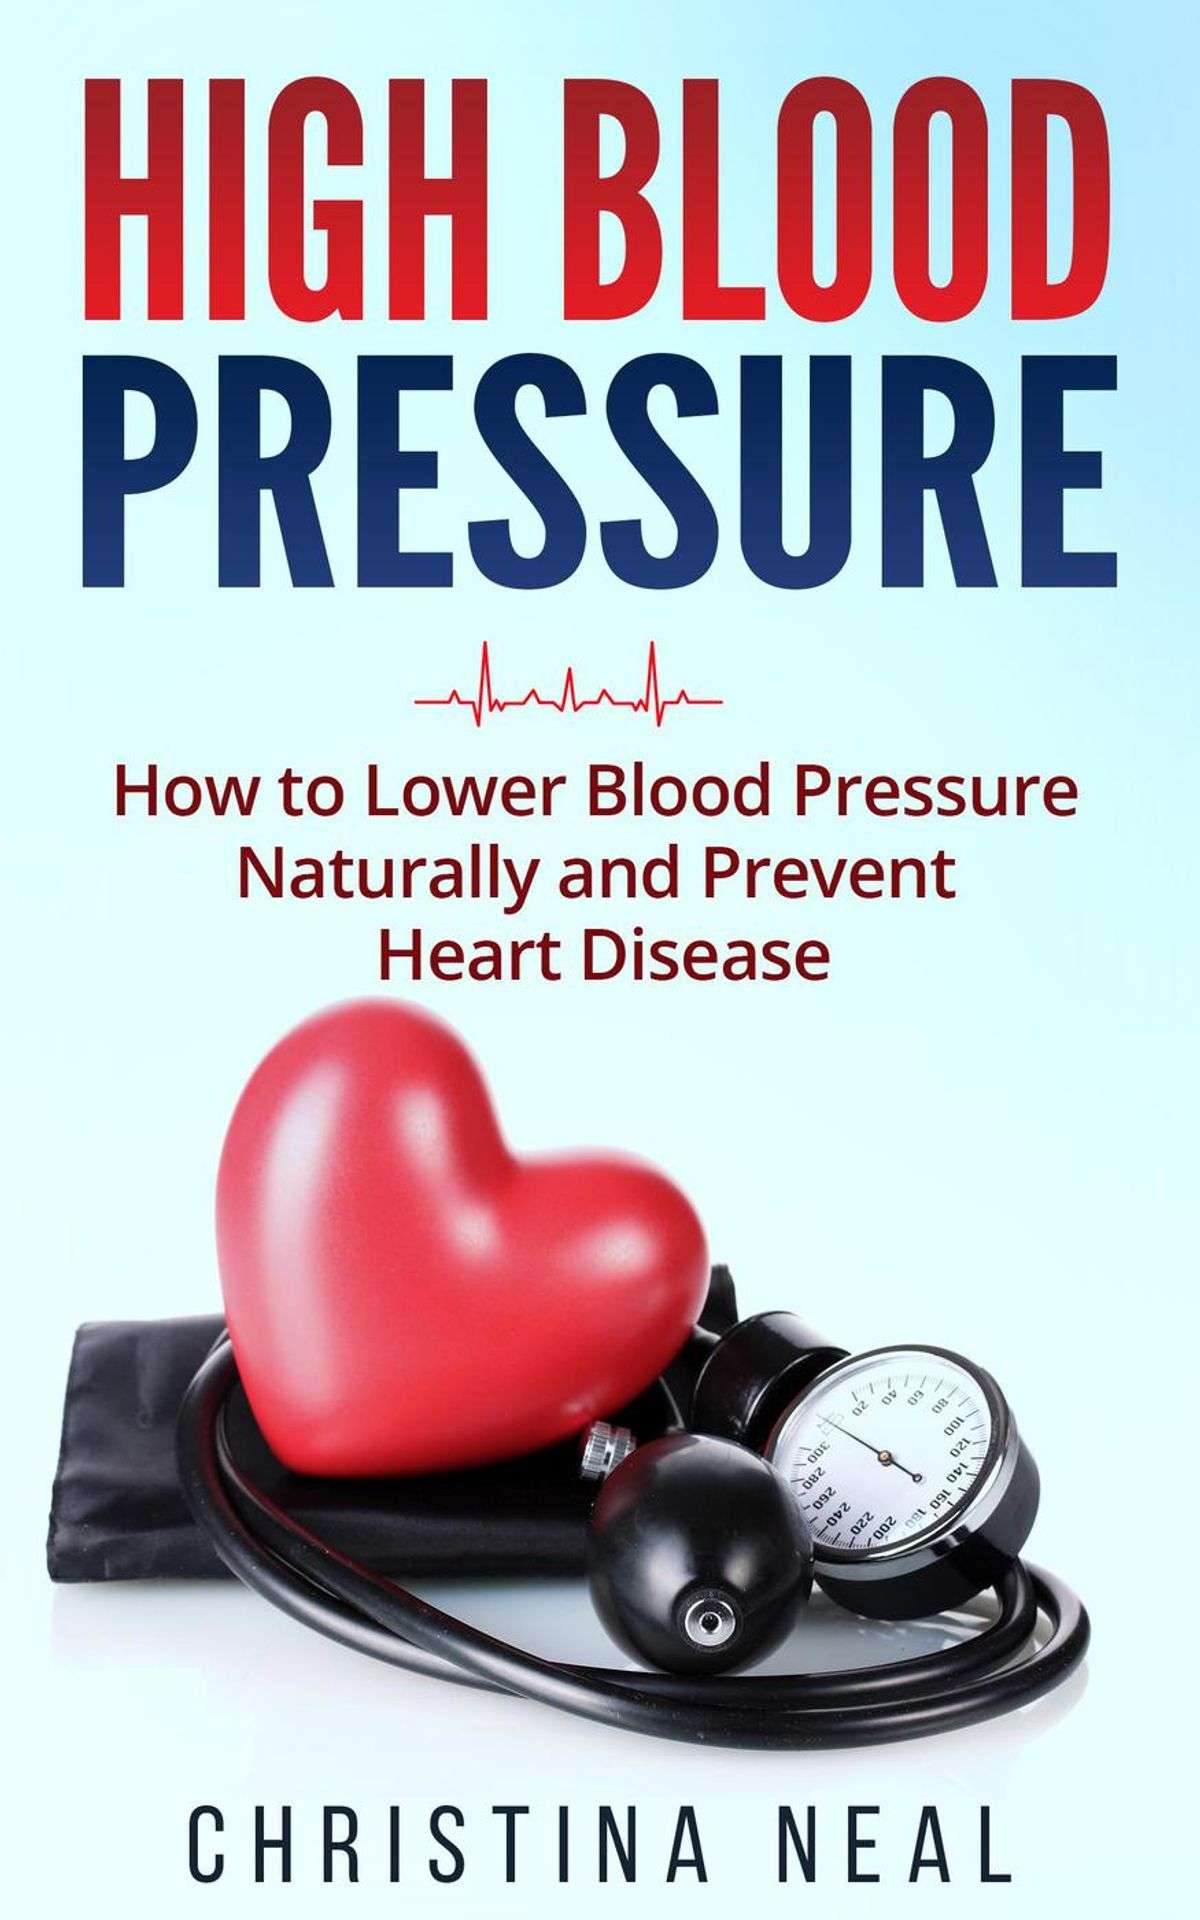 High Blood Pressure: How to Lower Blood Pressure Naturally ...